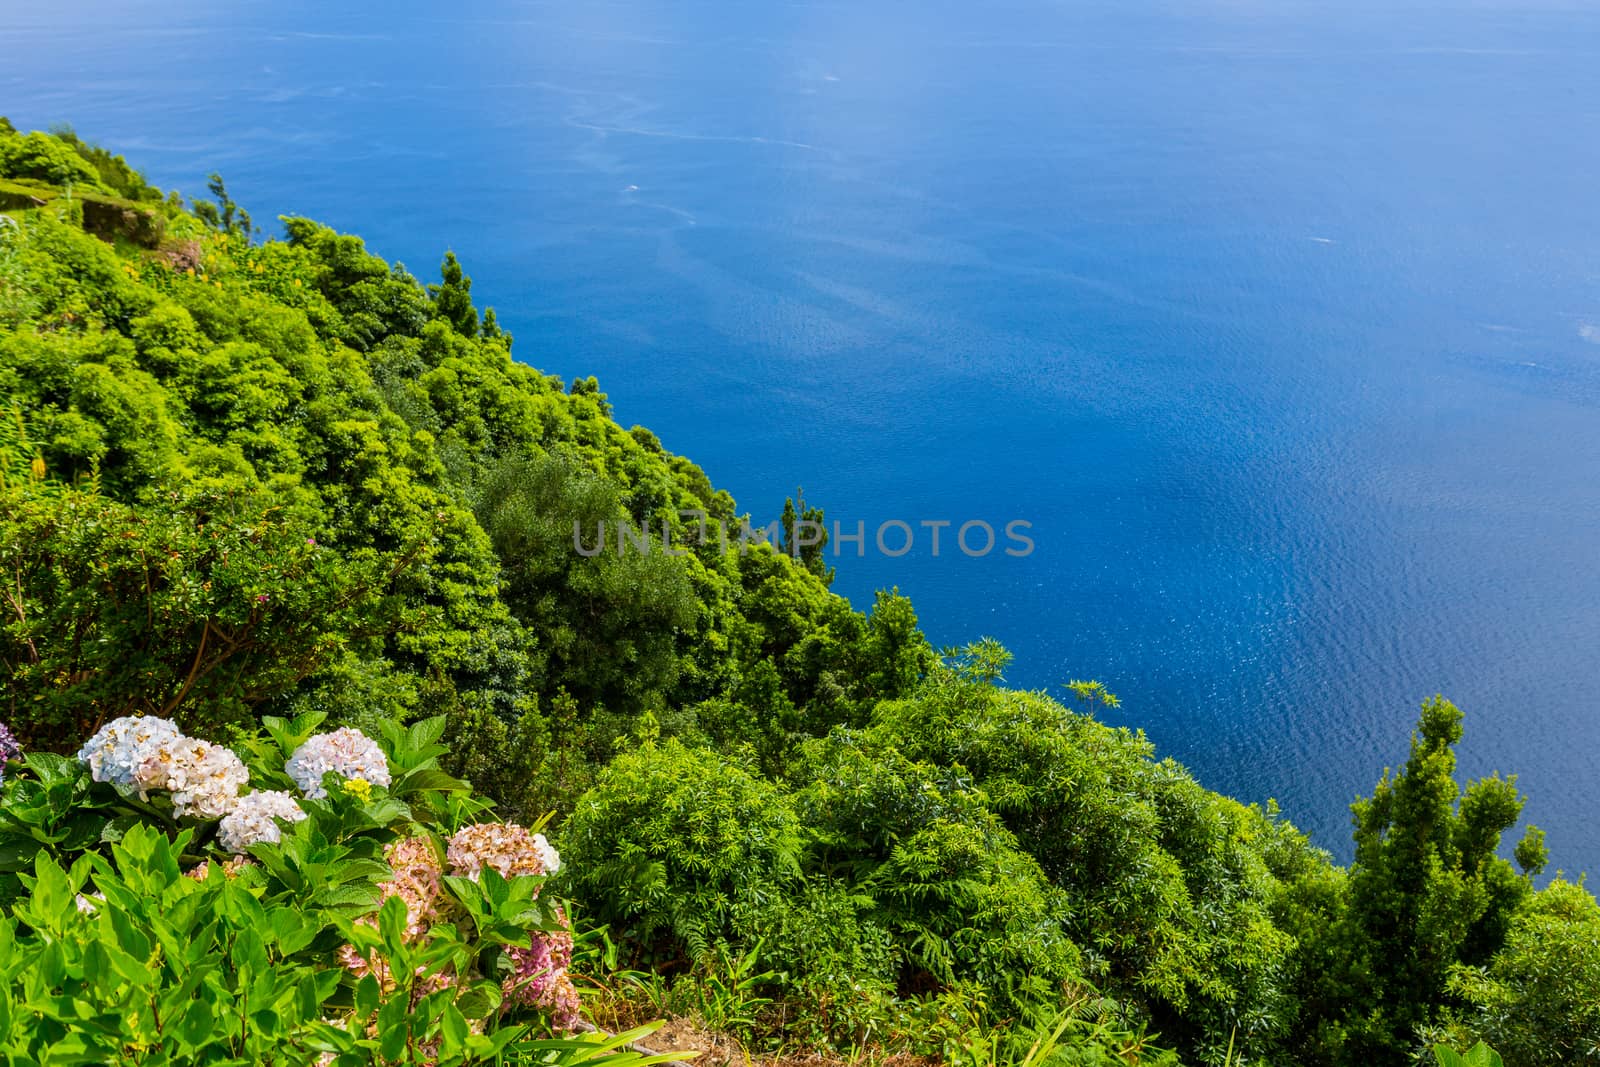 Northeast of the island of Sao Miguel in the Azores. Viewpoint of Ponta do Sossego. Amazingly point of interest in a major destination of Portugal.